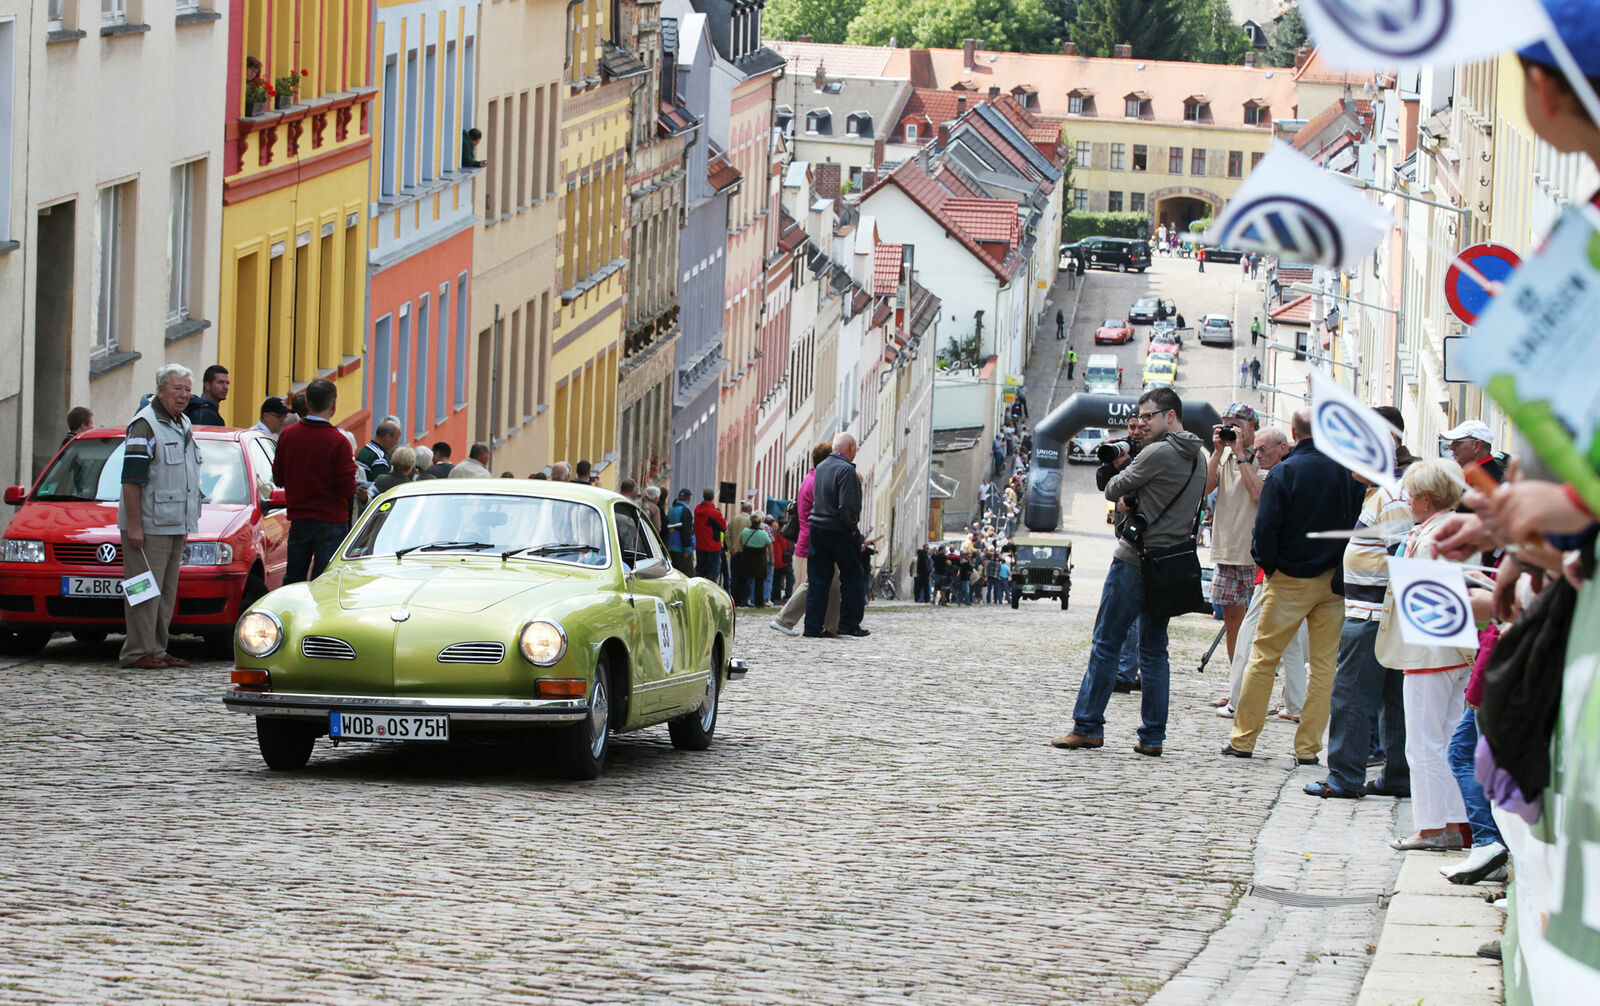 Karmann Ghia Type 14 Coupé (1974): This Volkswagen, built by Karmann in Osnabrück, has already experienced the Sachsen Classic – as seen here on the iconic “Steep Wall” stage in Meerane.